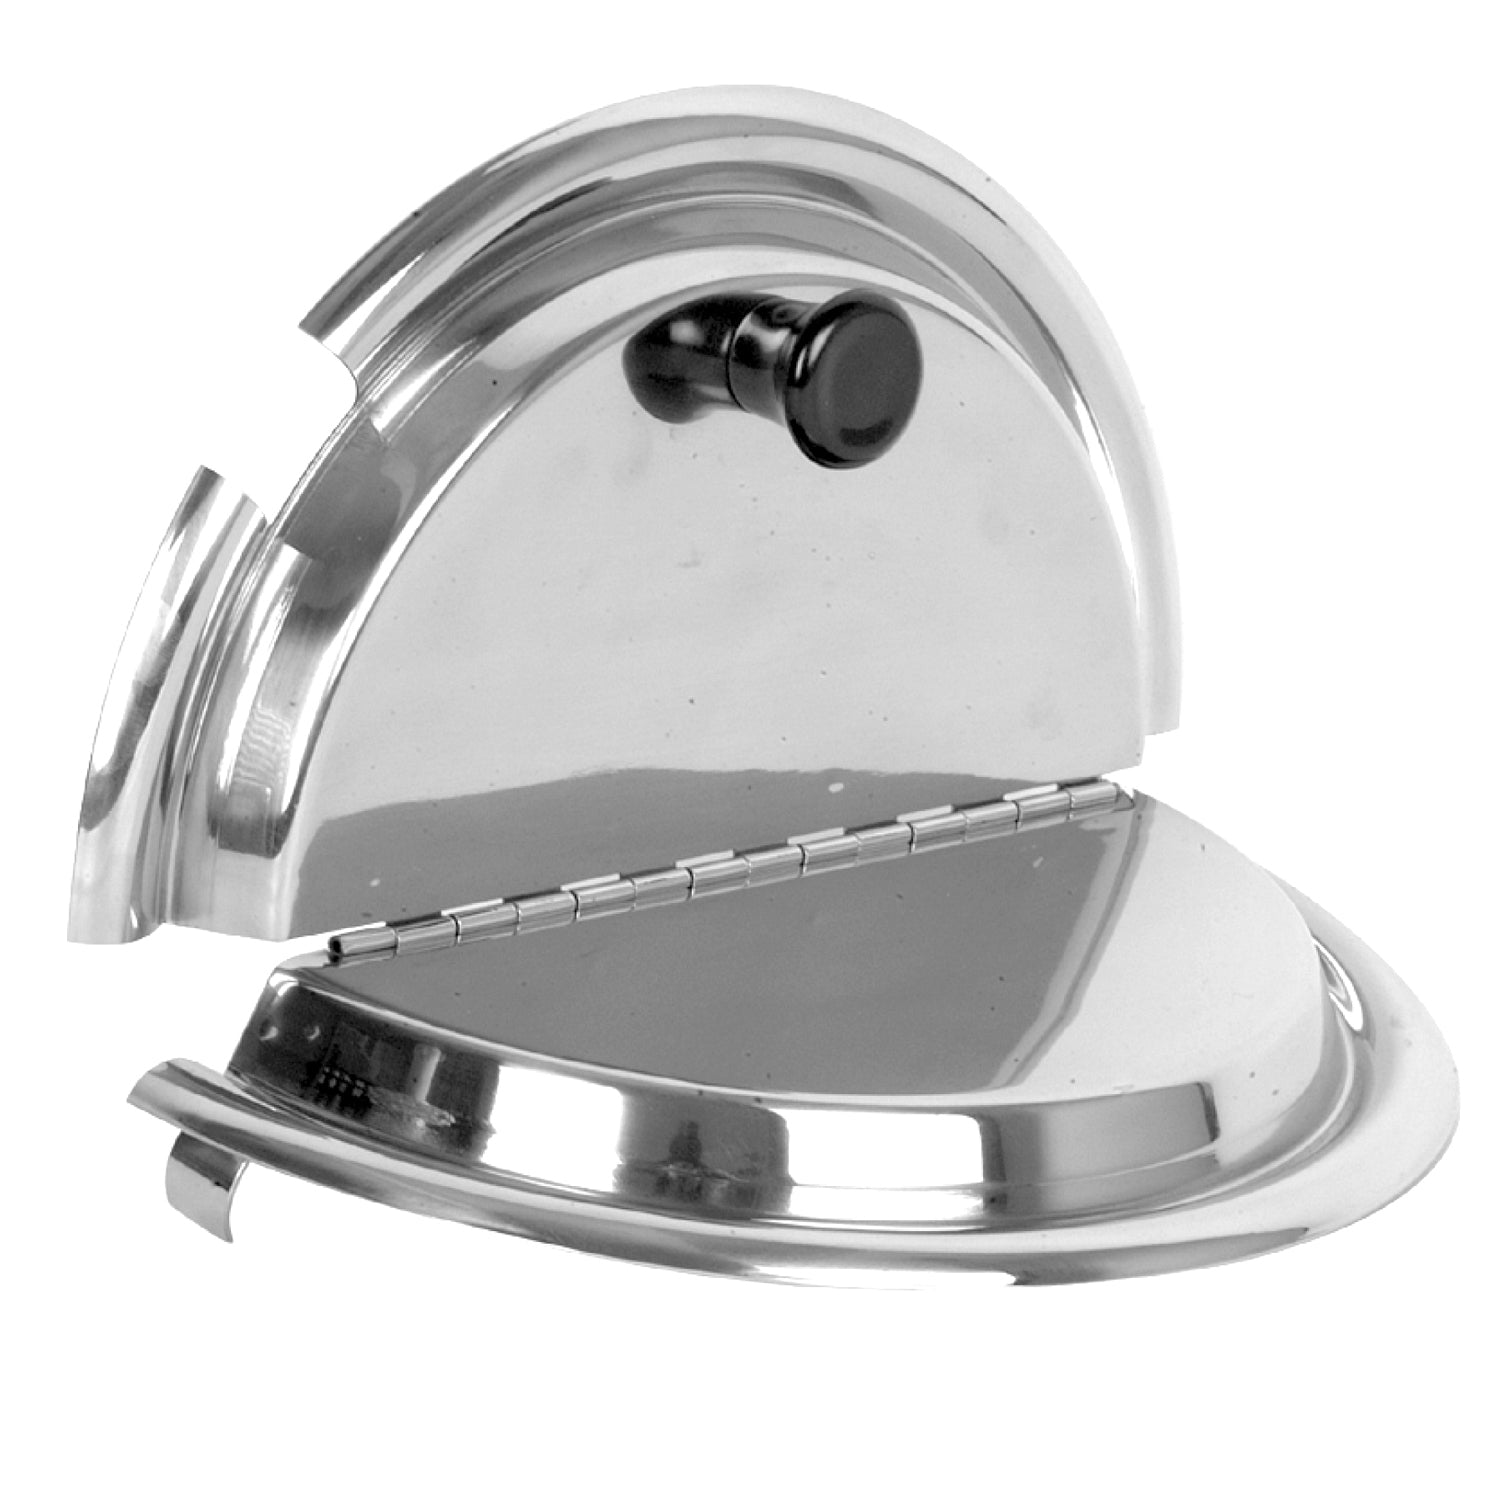 Thunder Group Stainless Steel Inset Pan Divided Cover